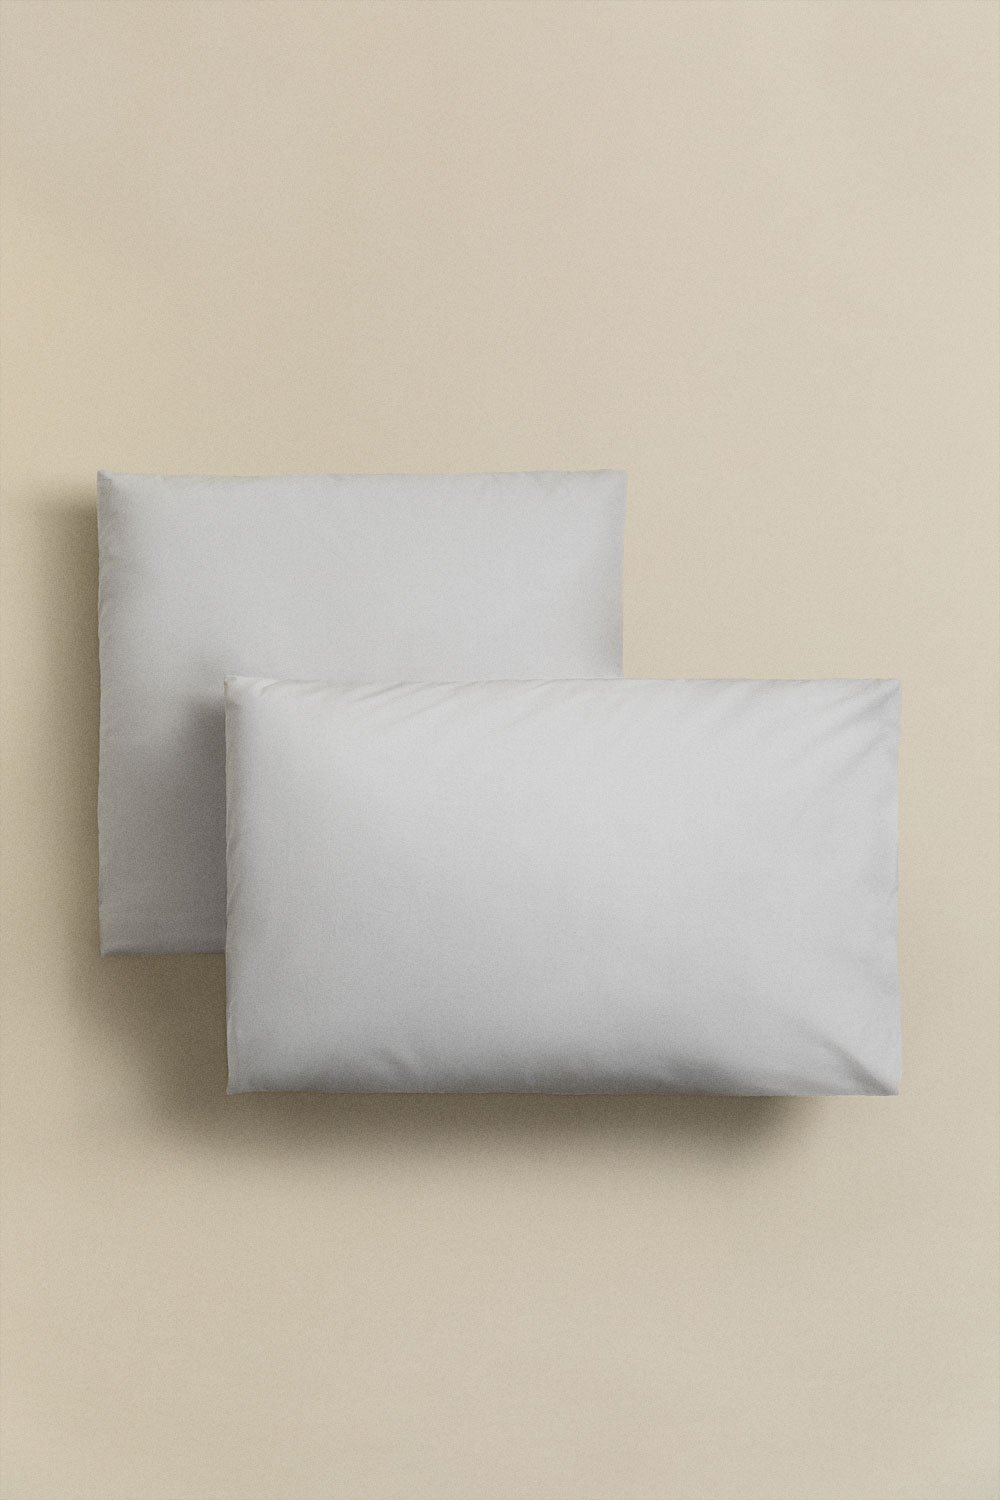 Set of 2 Pillowcases in Lesia 180 Thread Count Percale Cotton, gallery image 1